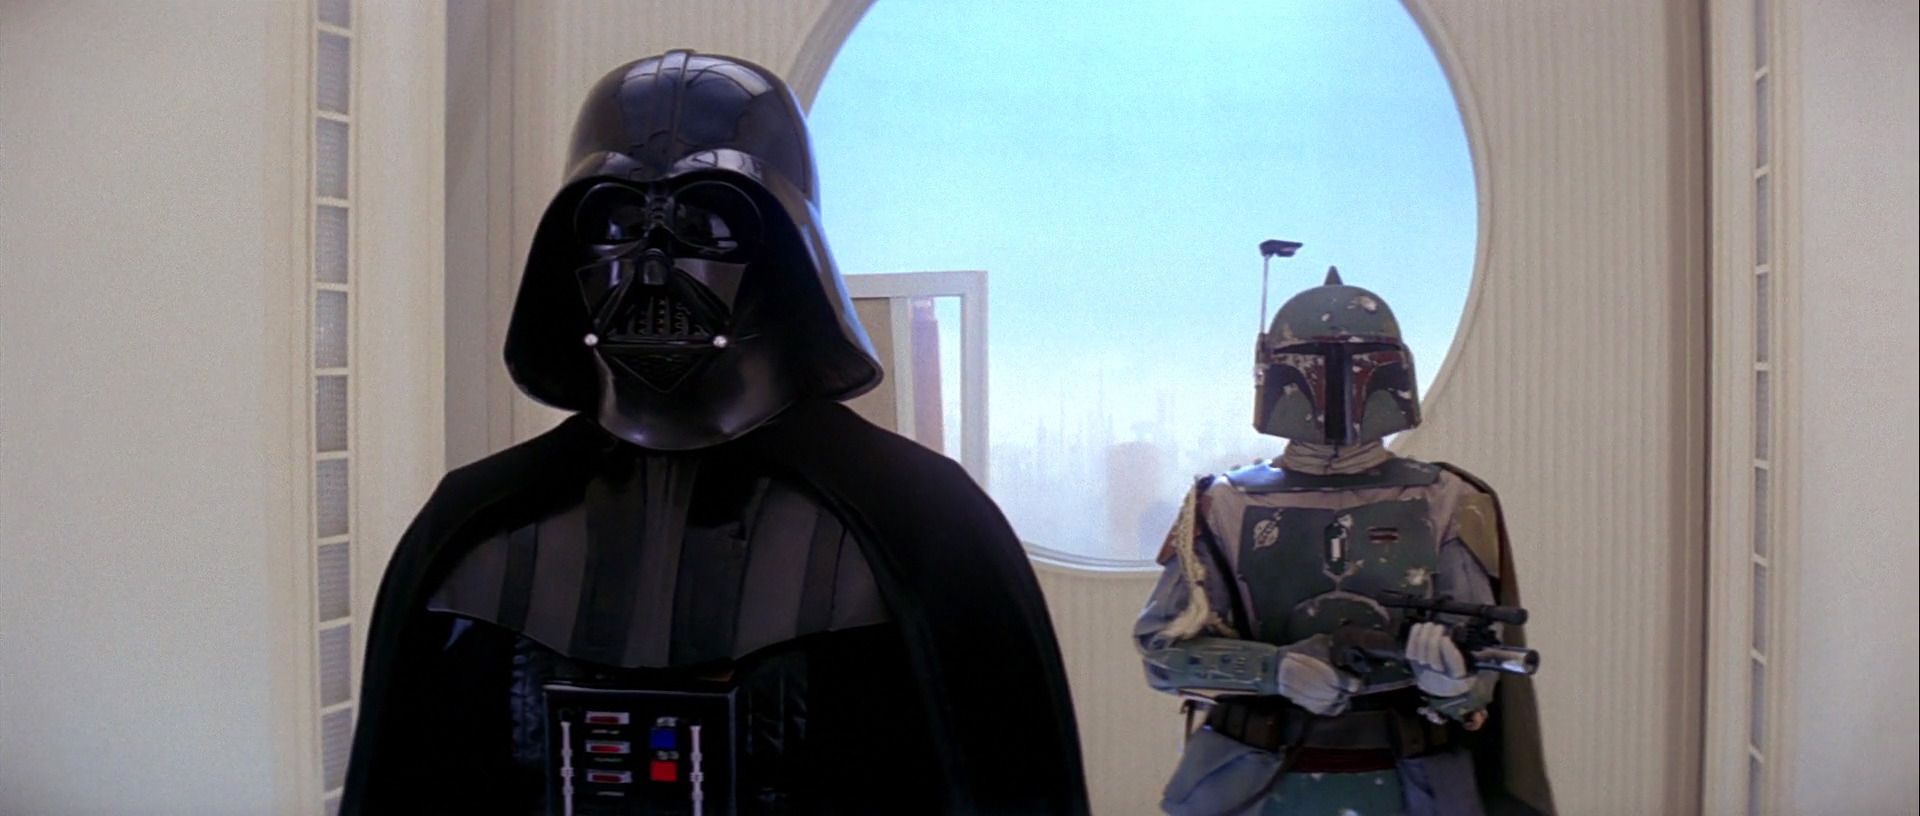 Star Wars The 10 Most Shocking Twists & Reveals In The Original Trilogy Ranked